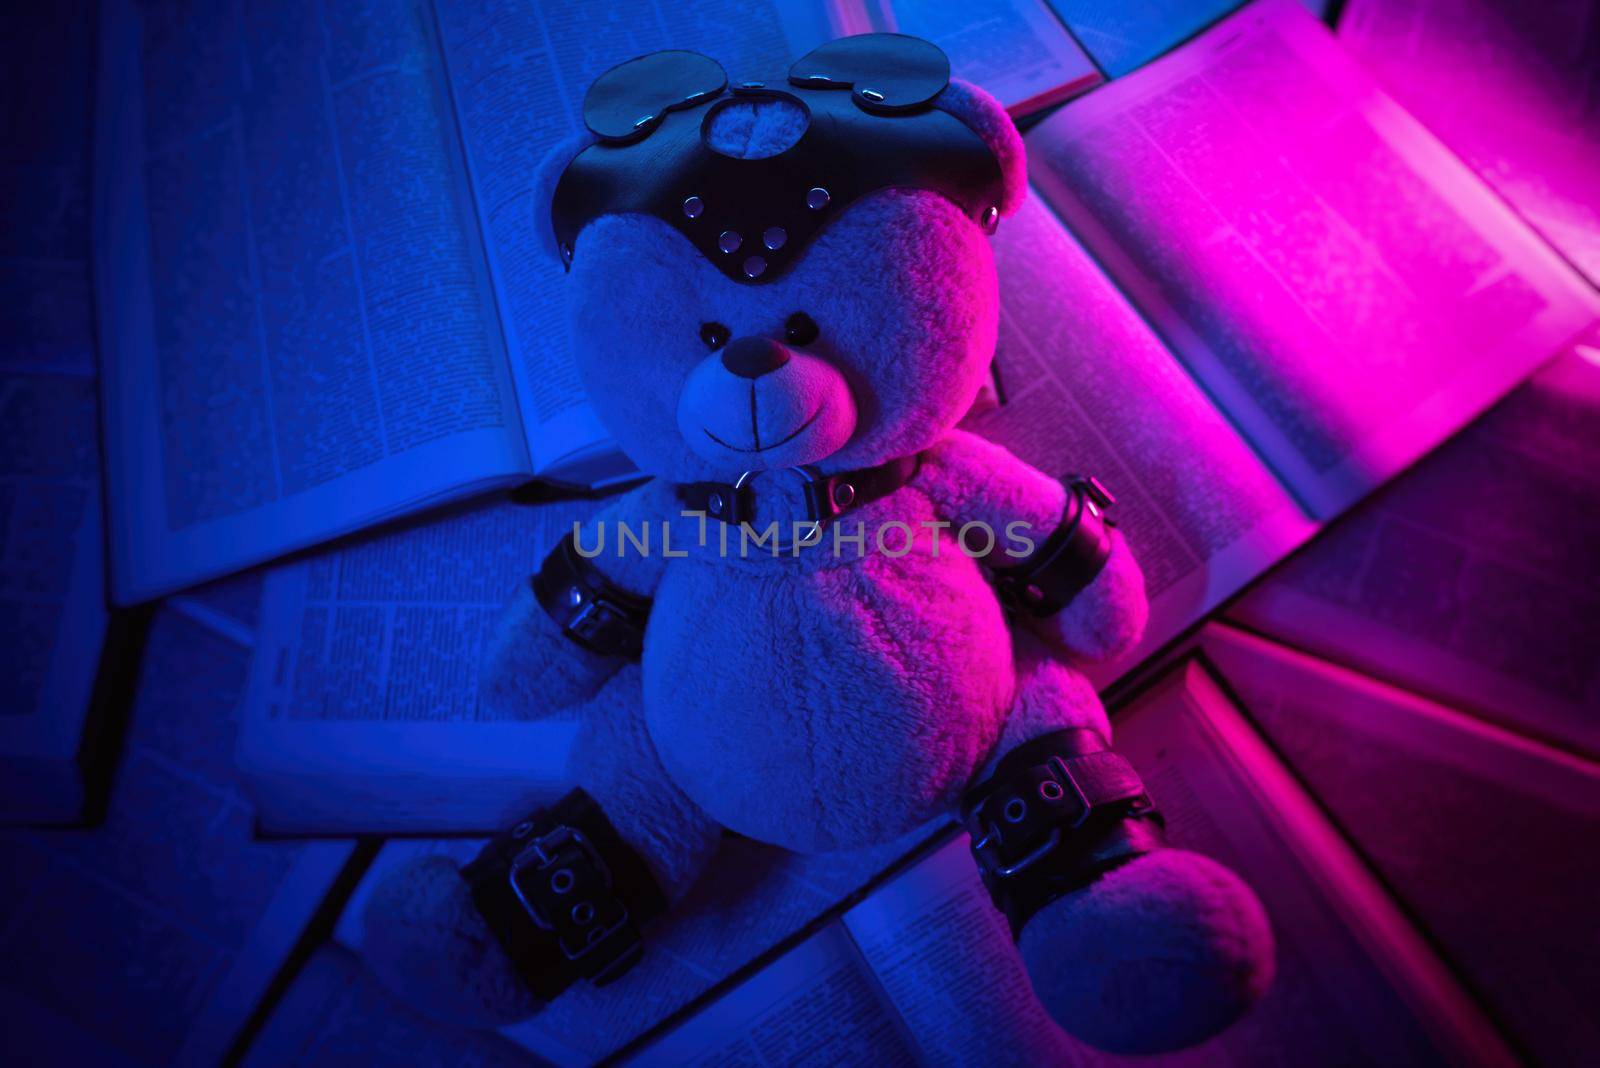 accessory for bdsm games on a teddy bear by Rotozey